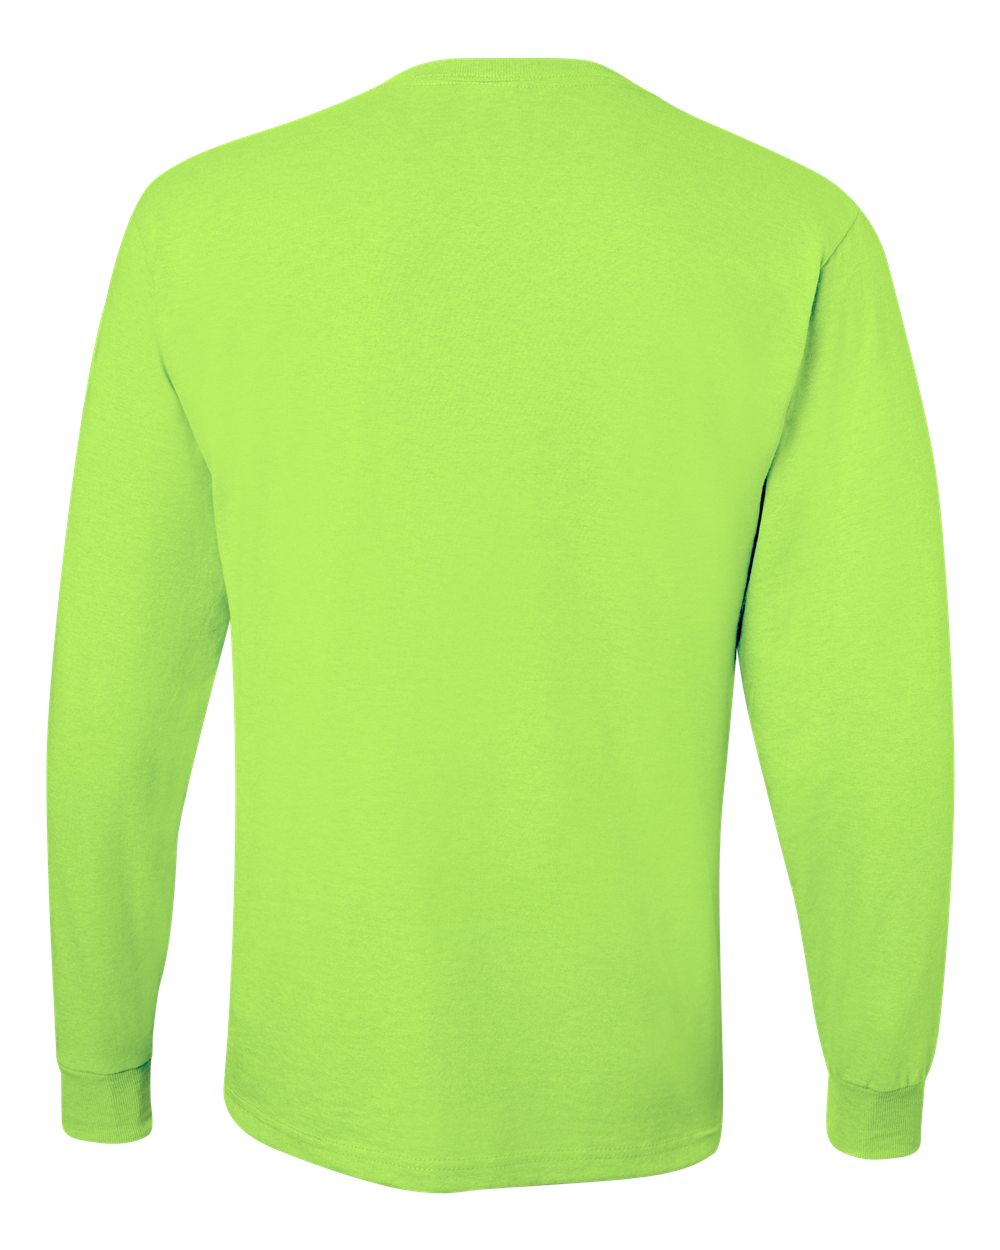 JERZEES Dri-Power® Long Sleeve 50/50 T-Shirt 29LSR #color_Safety Green